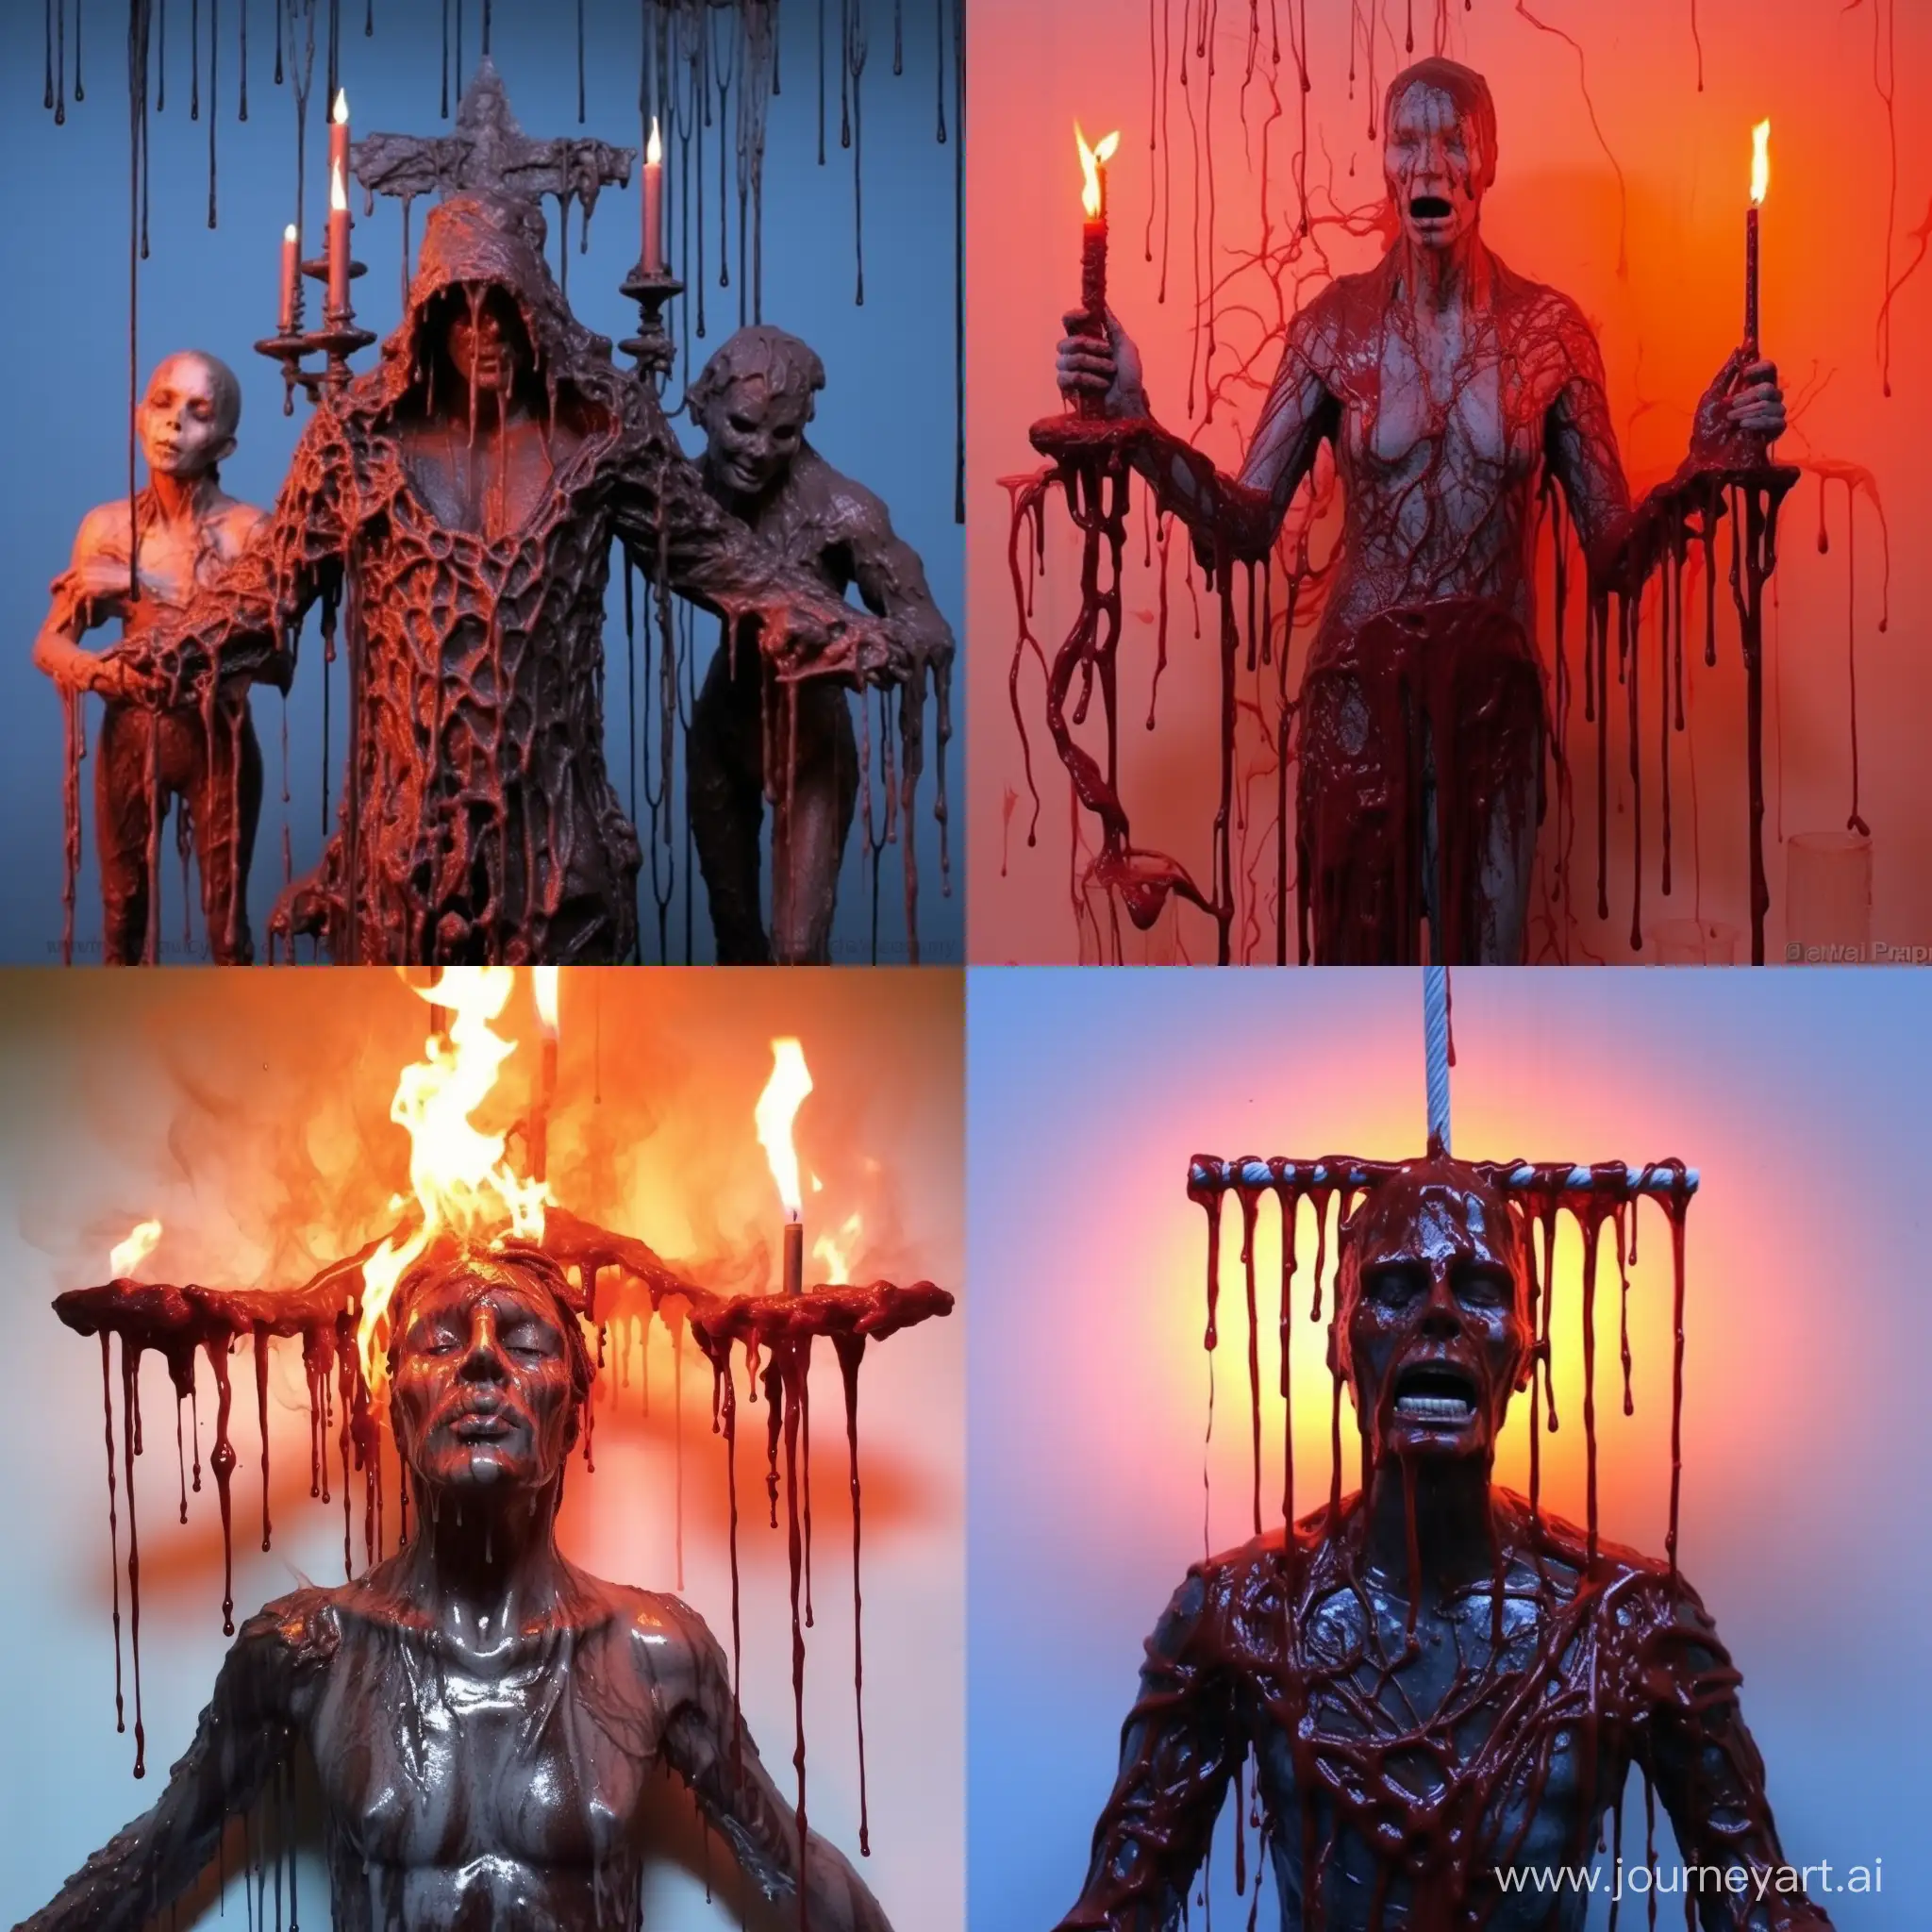 Sculpted-Wax-Figures-in-Dramatic-Fiery-Display